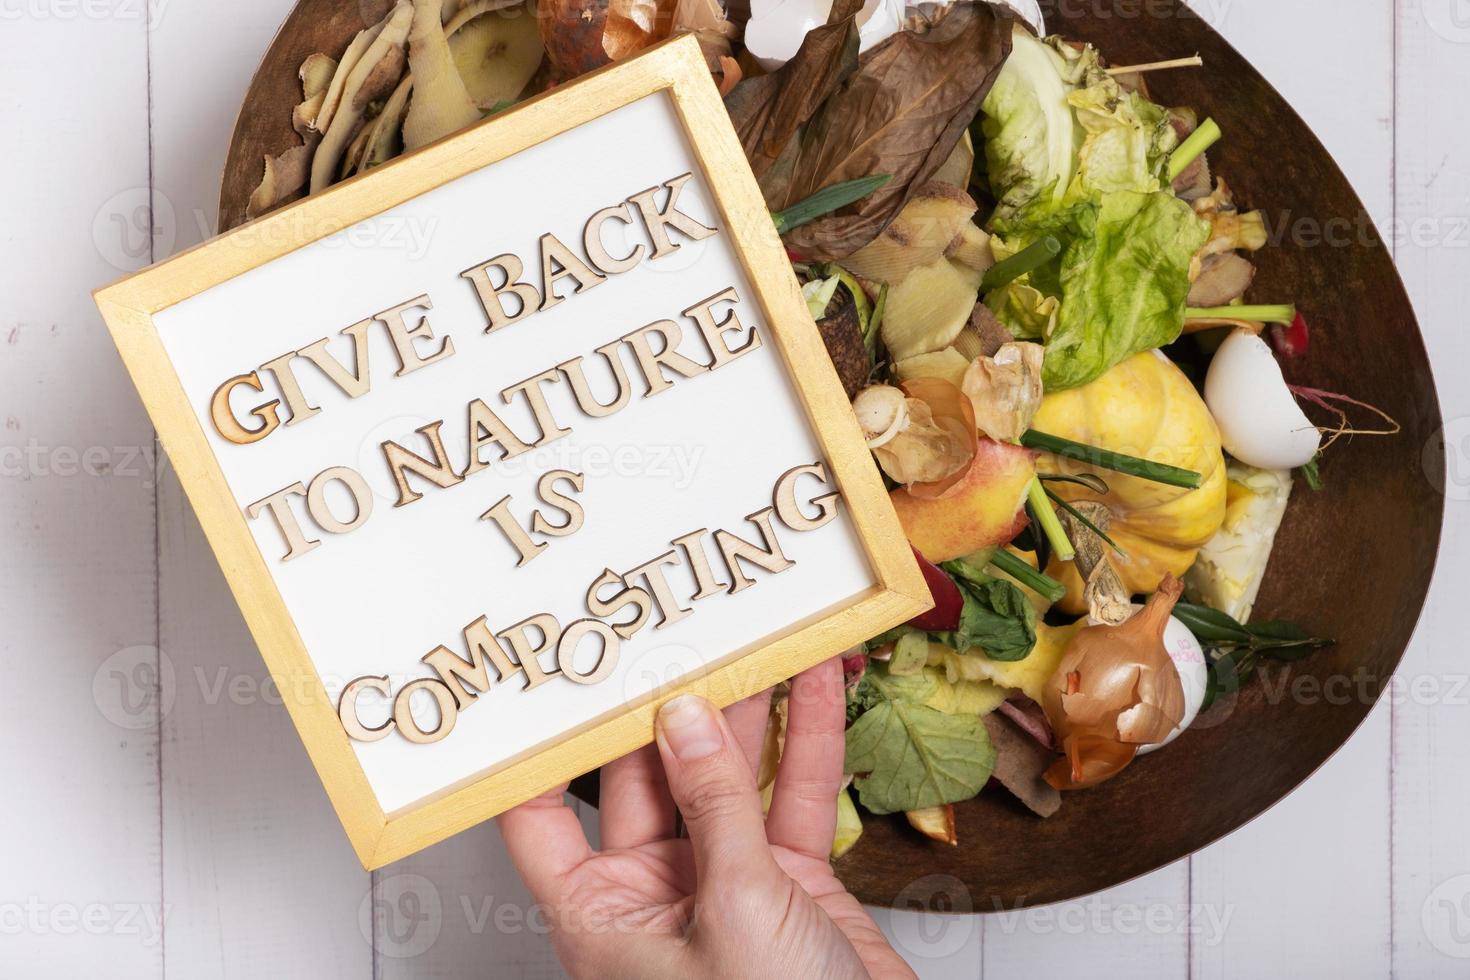 Give back to nature is composting motivation text with organic garbage for compost photo